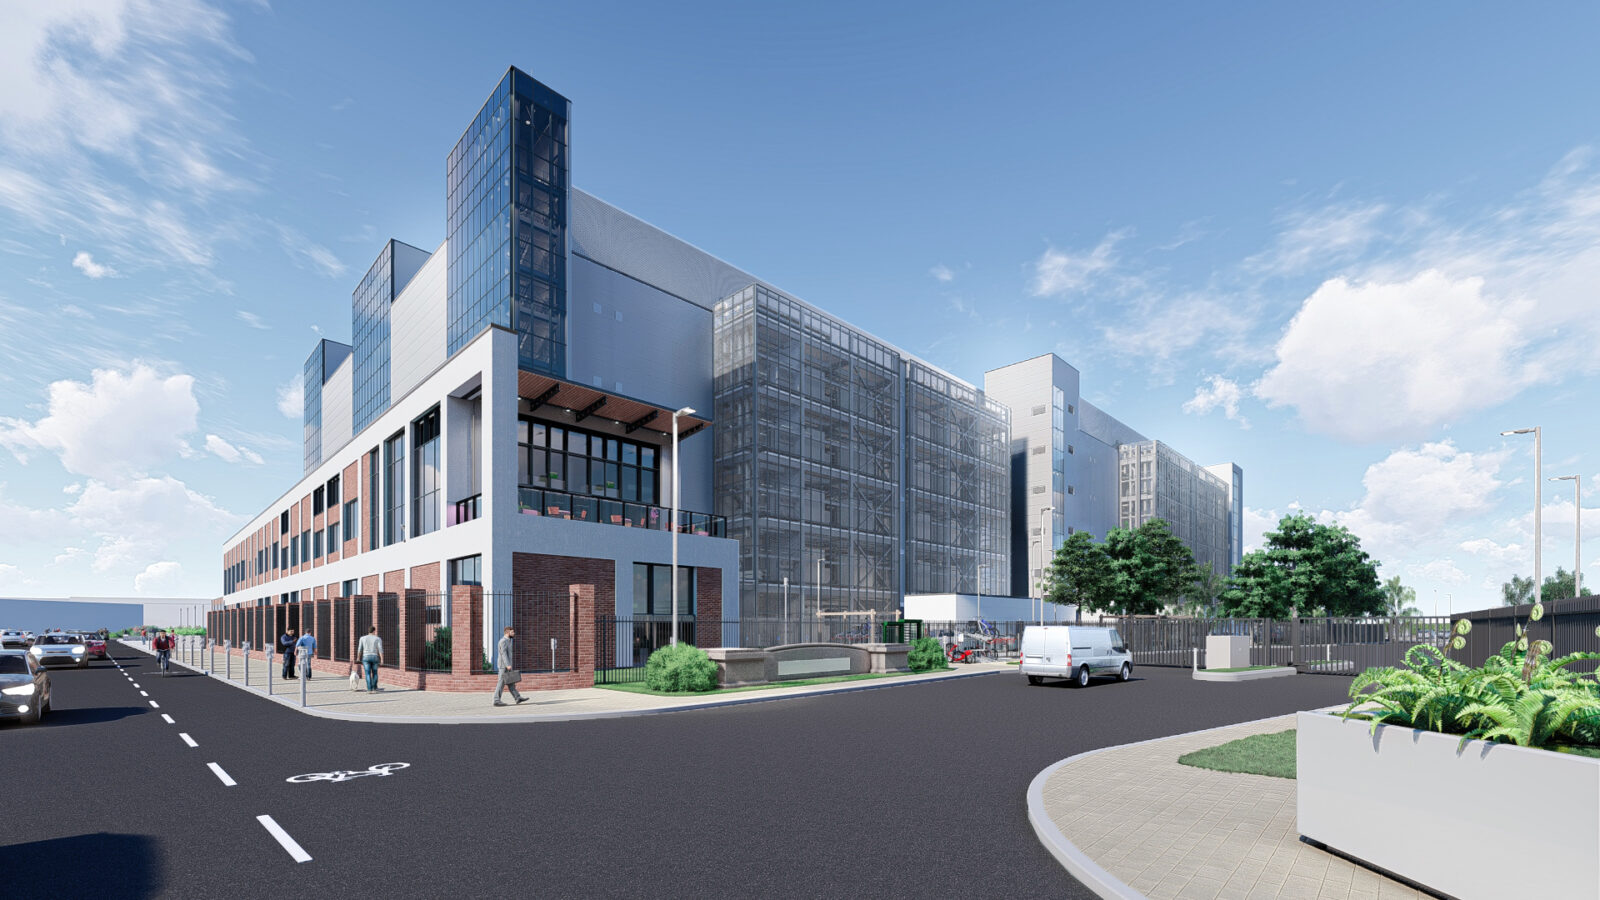 Daytime rendering of the Park Royal datacenter from the Southwest corner of the site looking Northeast.